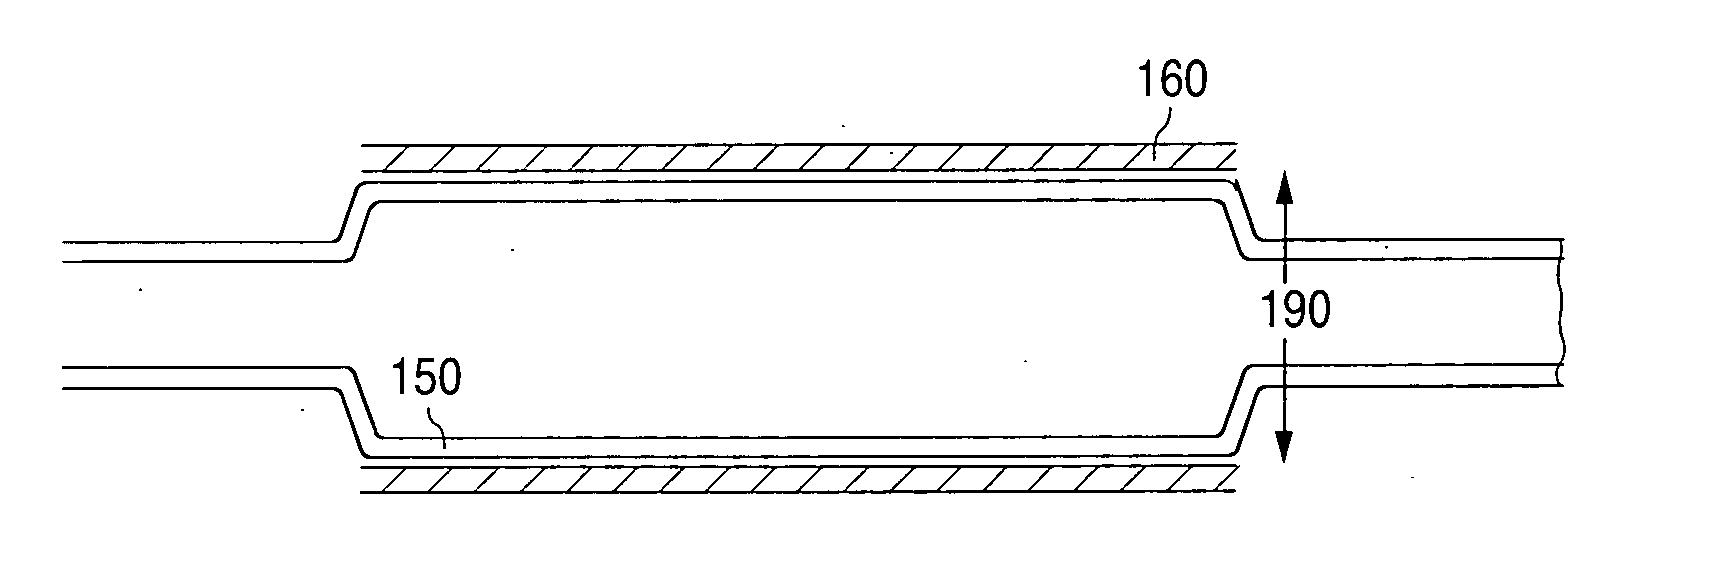 Method of fabricating a biaxially oriented implantable medical device